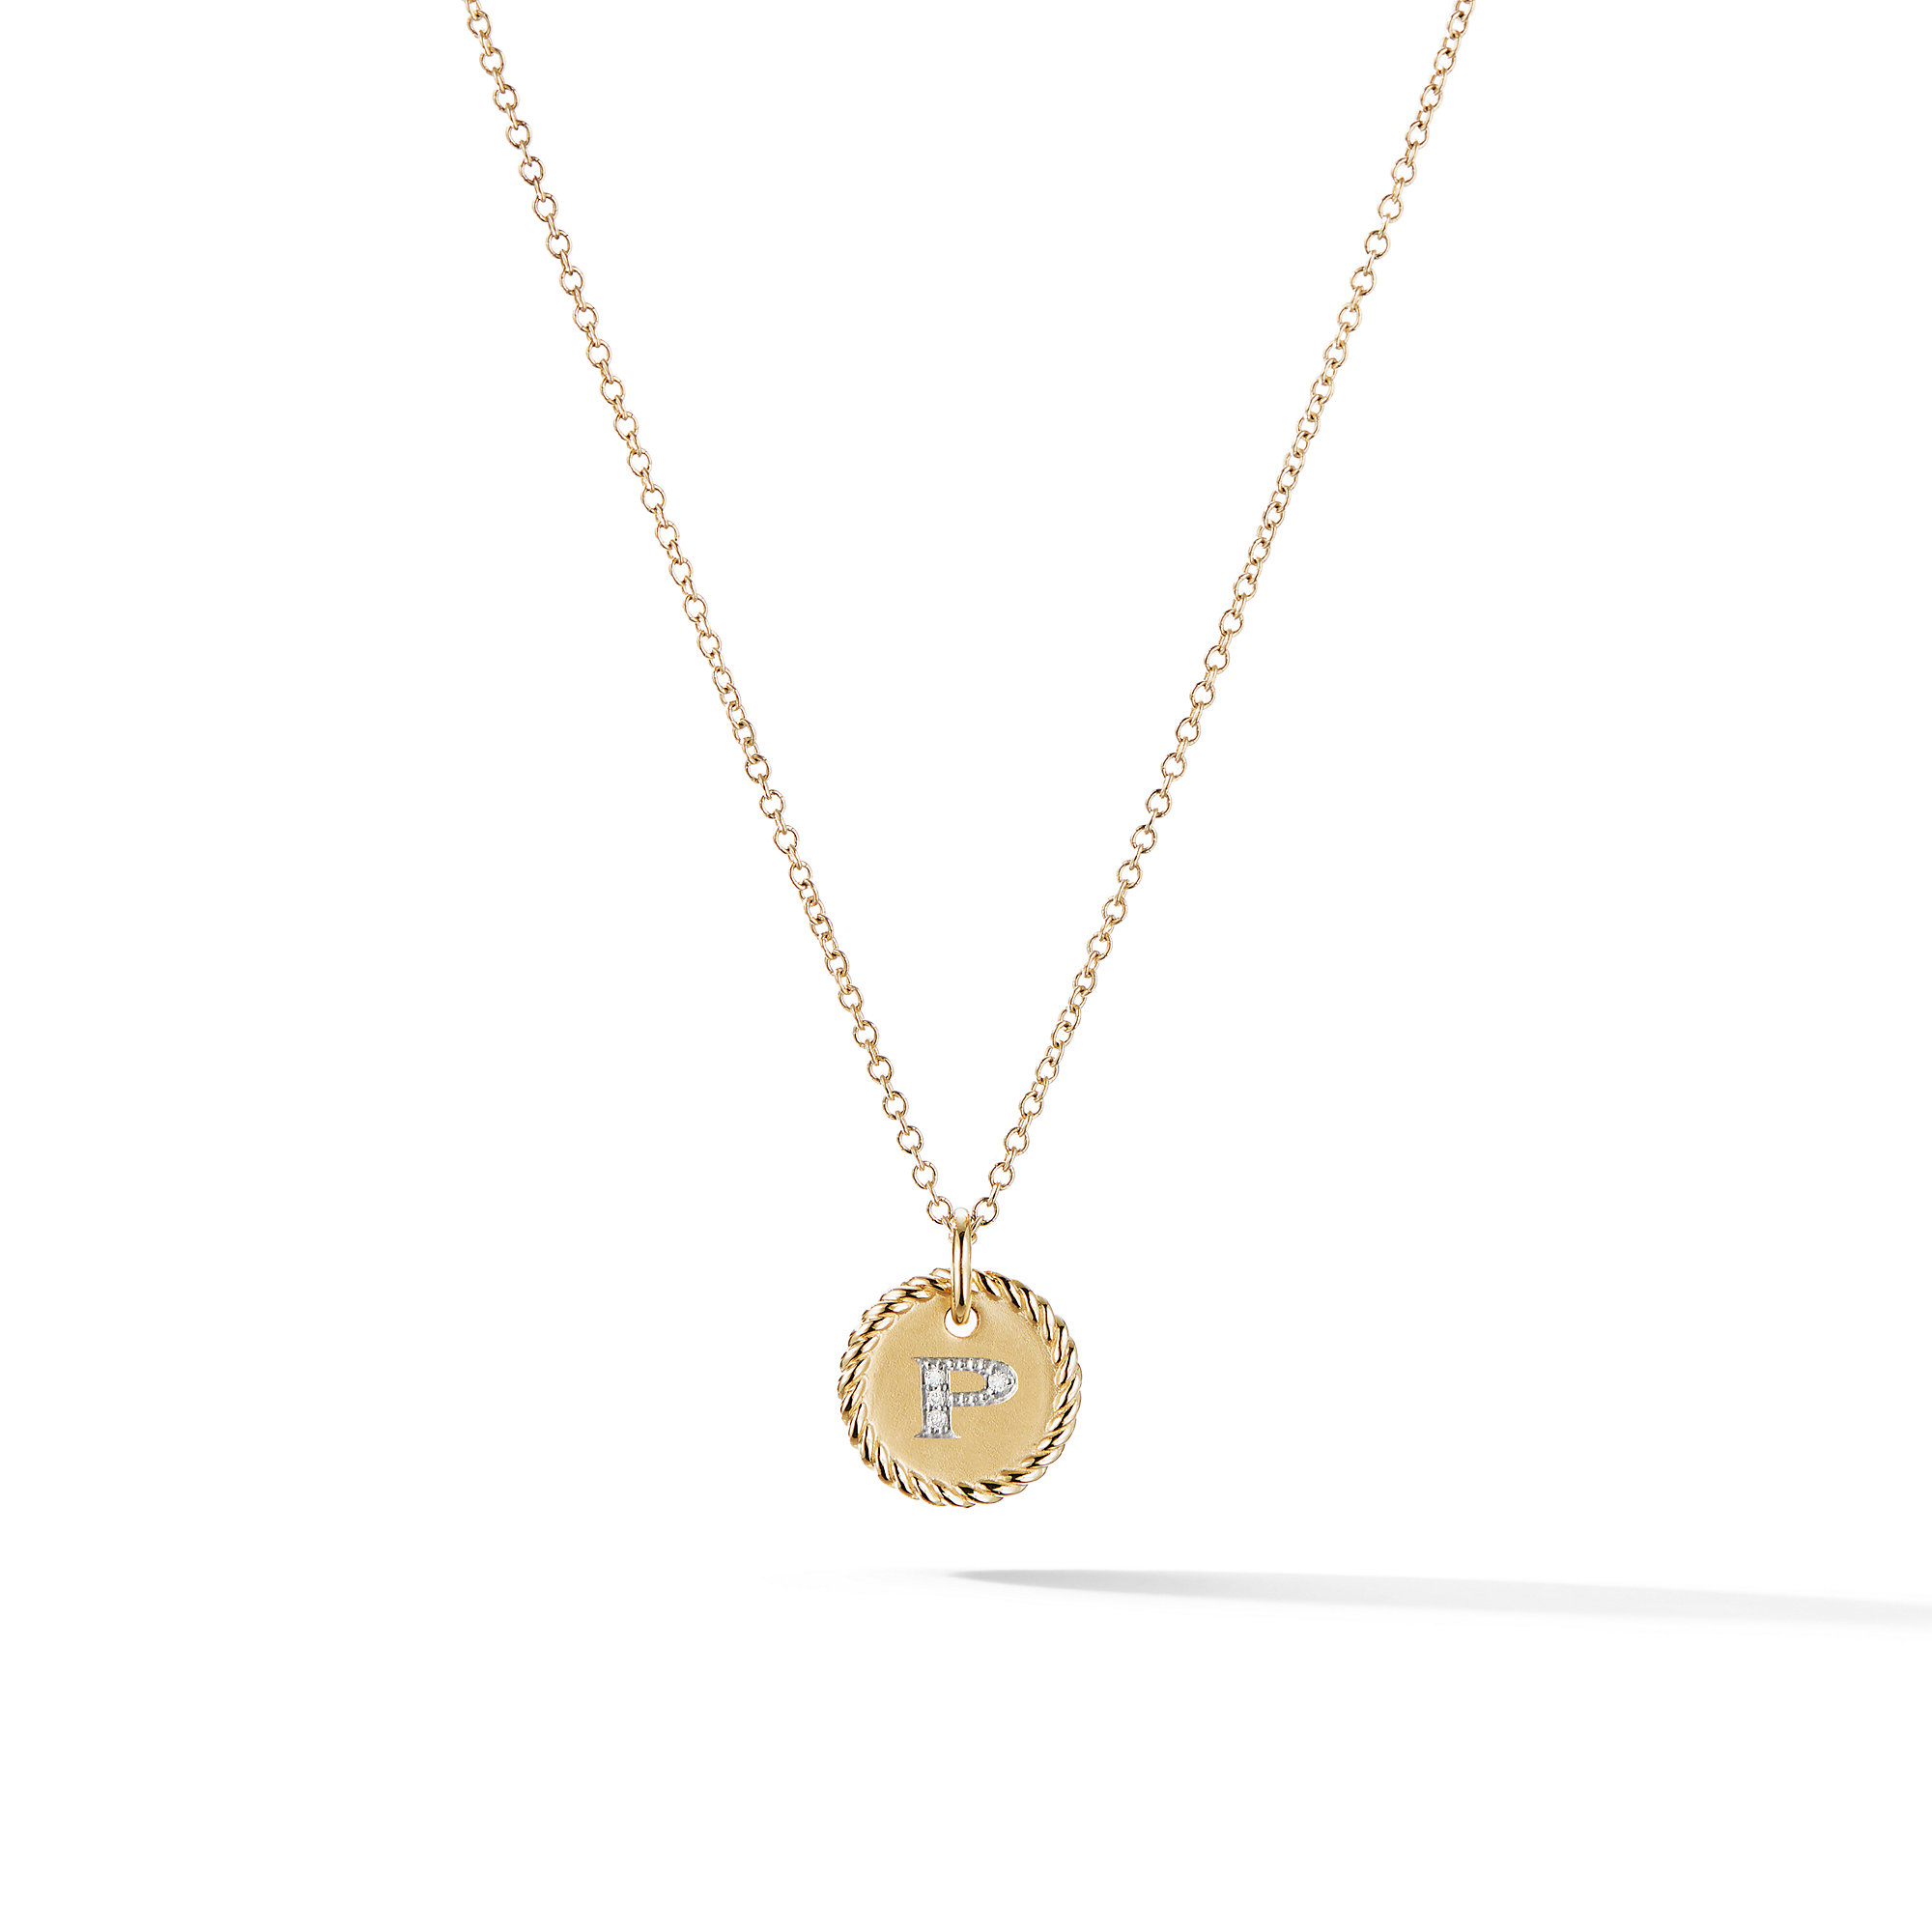 P Pendant with Diamonds in Gold on Chain